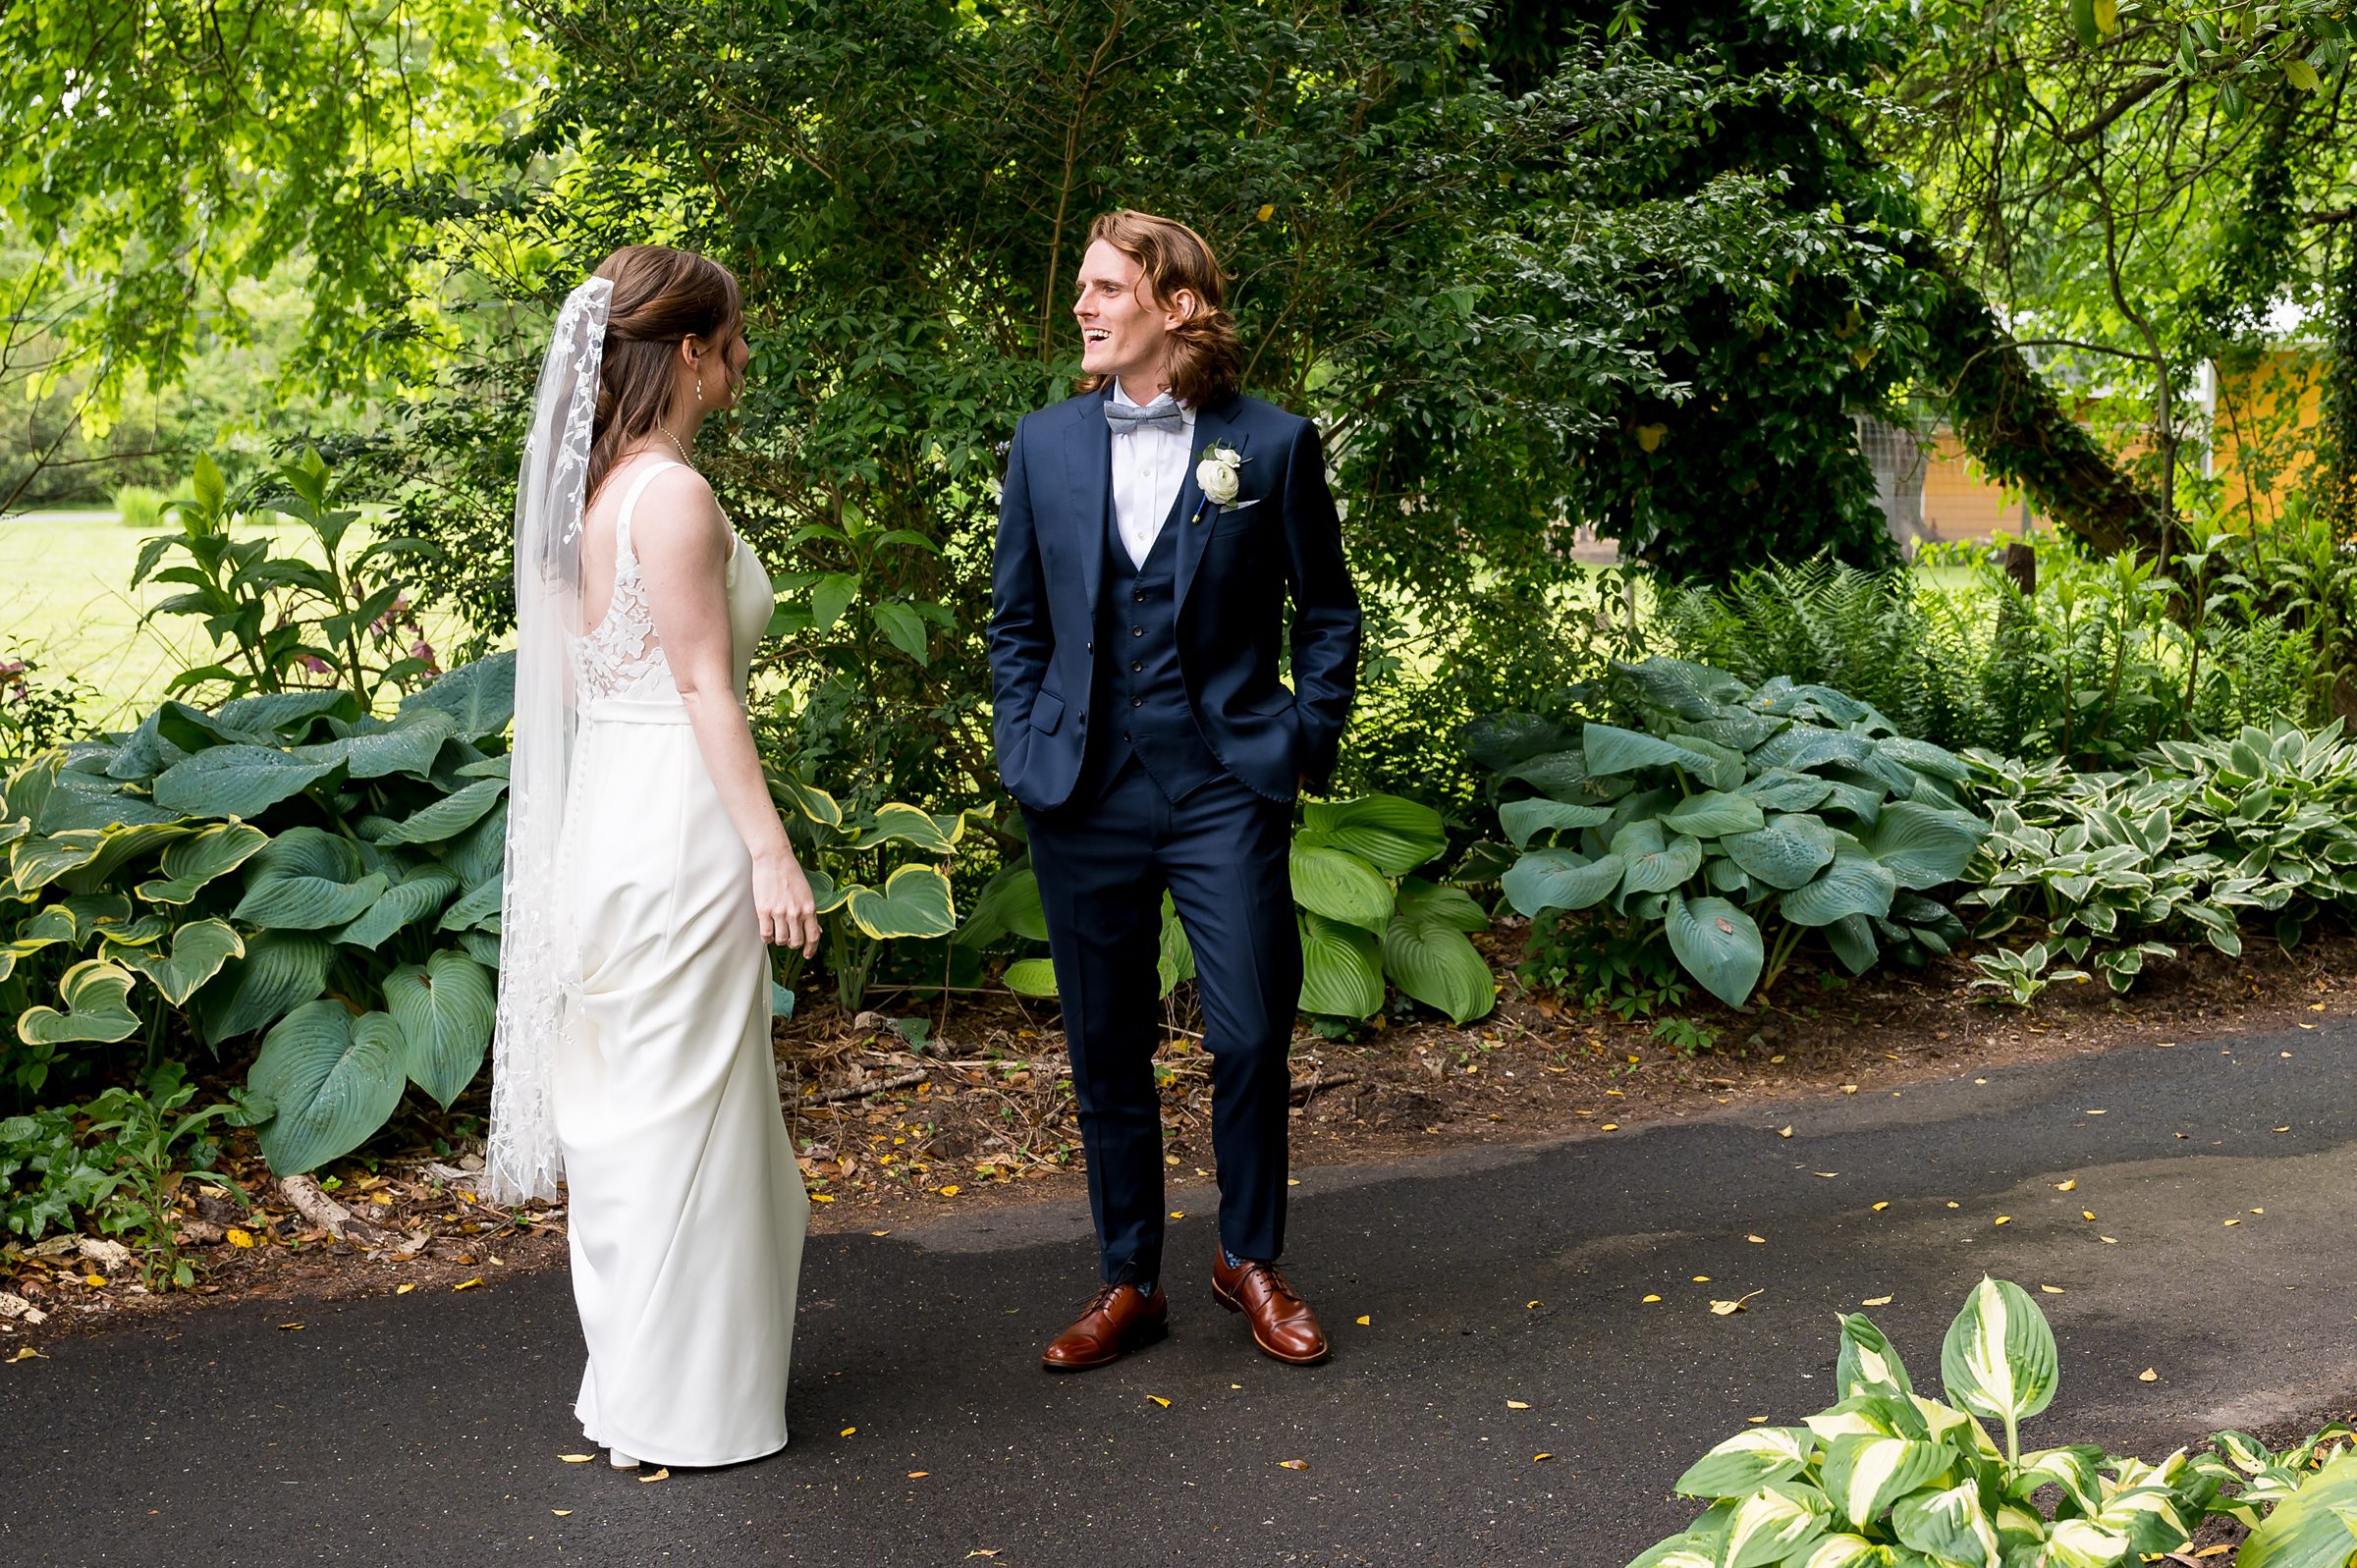 A bride in a white dress and veil and a groom in a navy suit stand facing each other outdoors on a path surrounded by greenery.